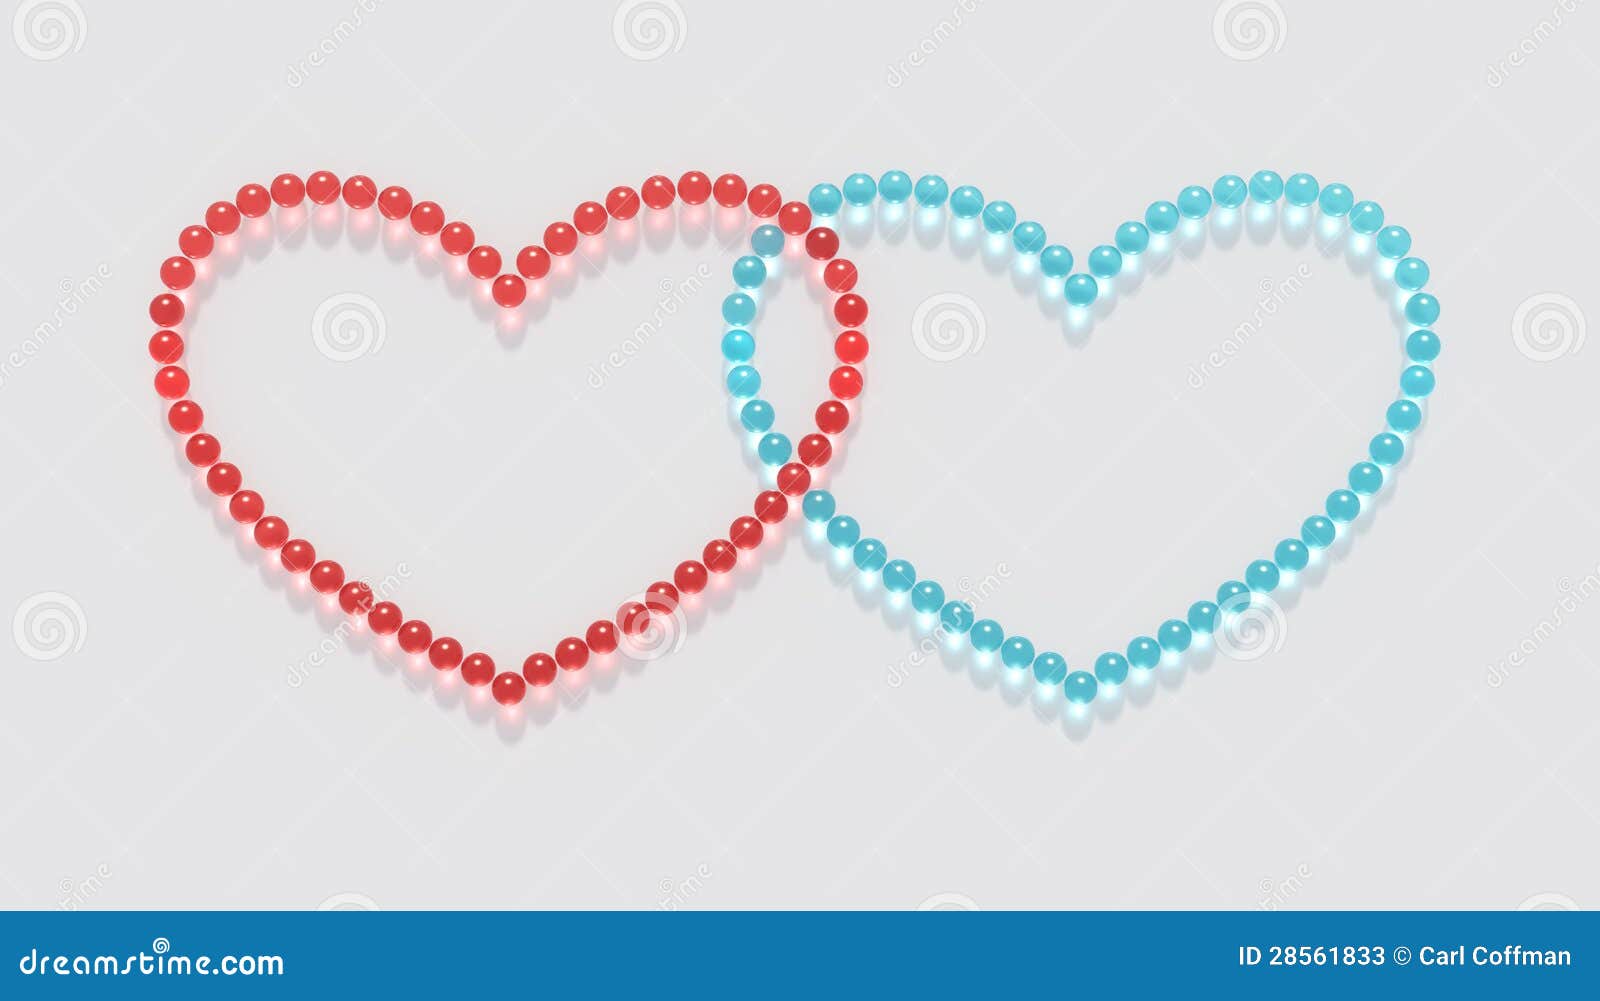 Overlapping red paper hearts form larger heart png download - 3236